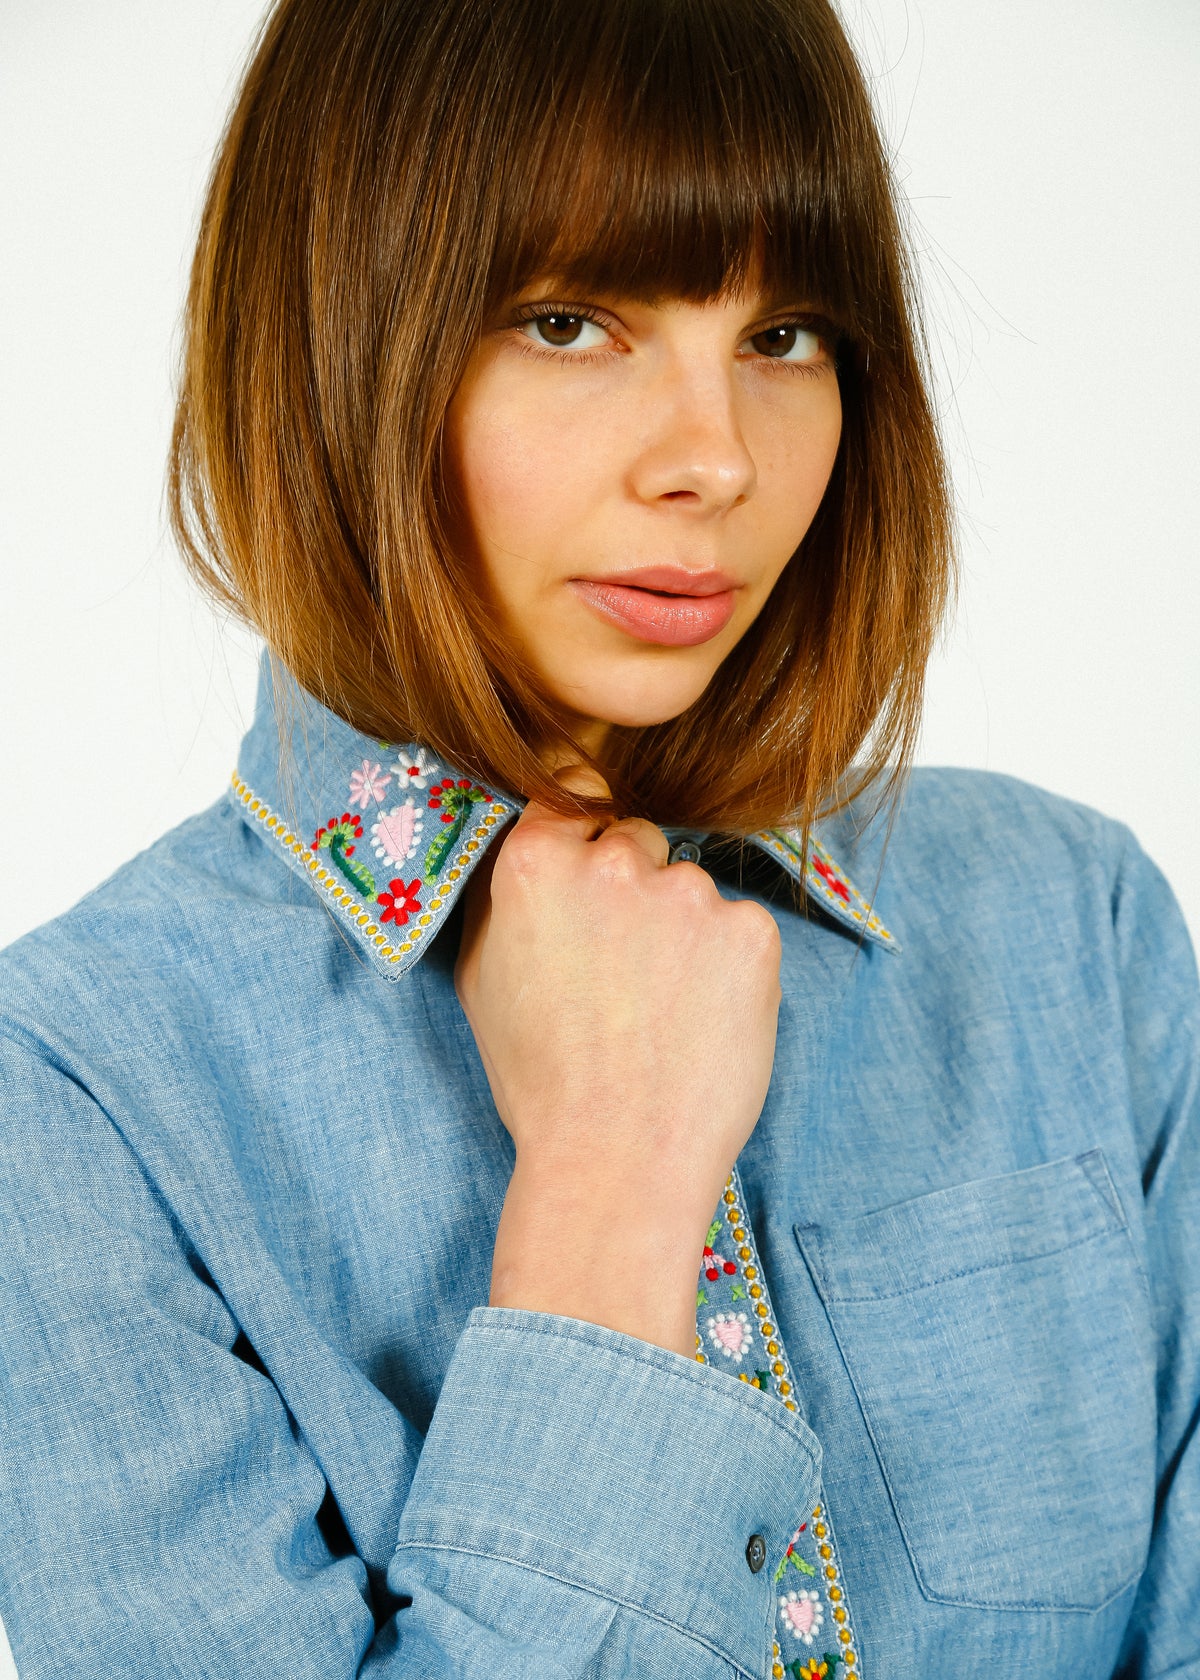 MM Udine Shirt in Chambray